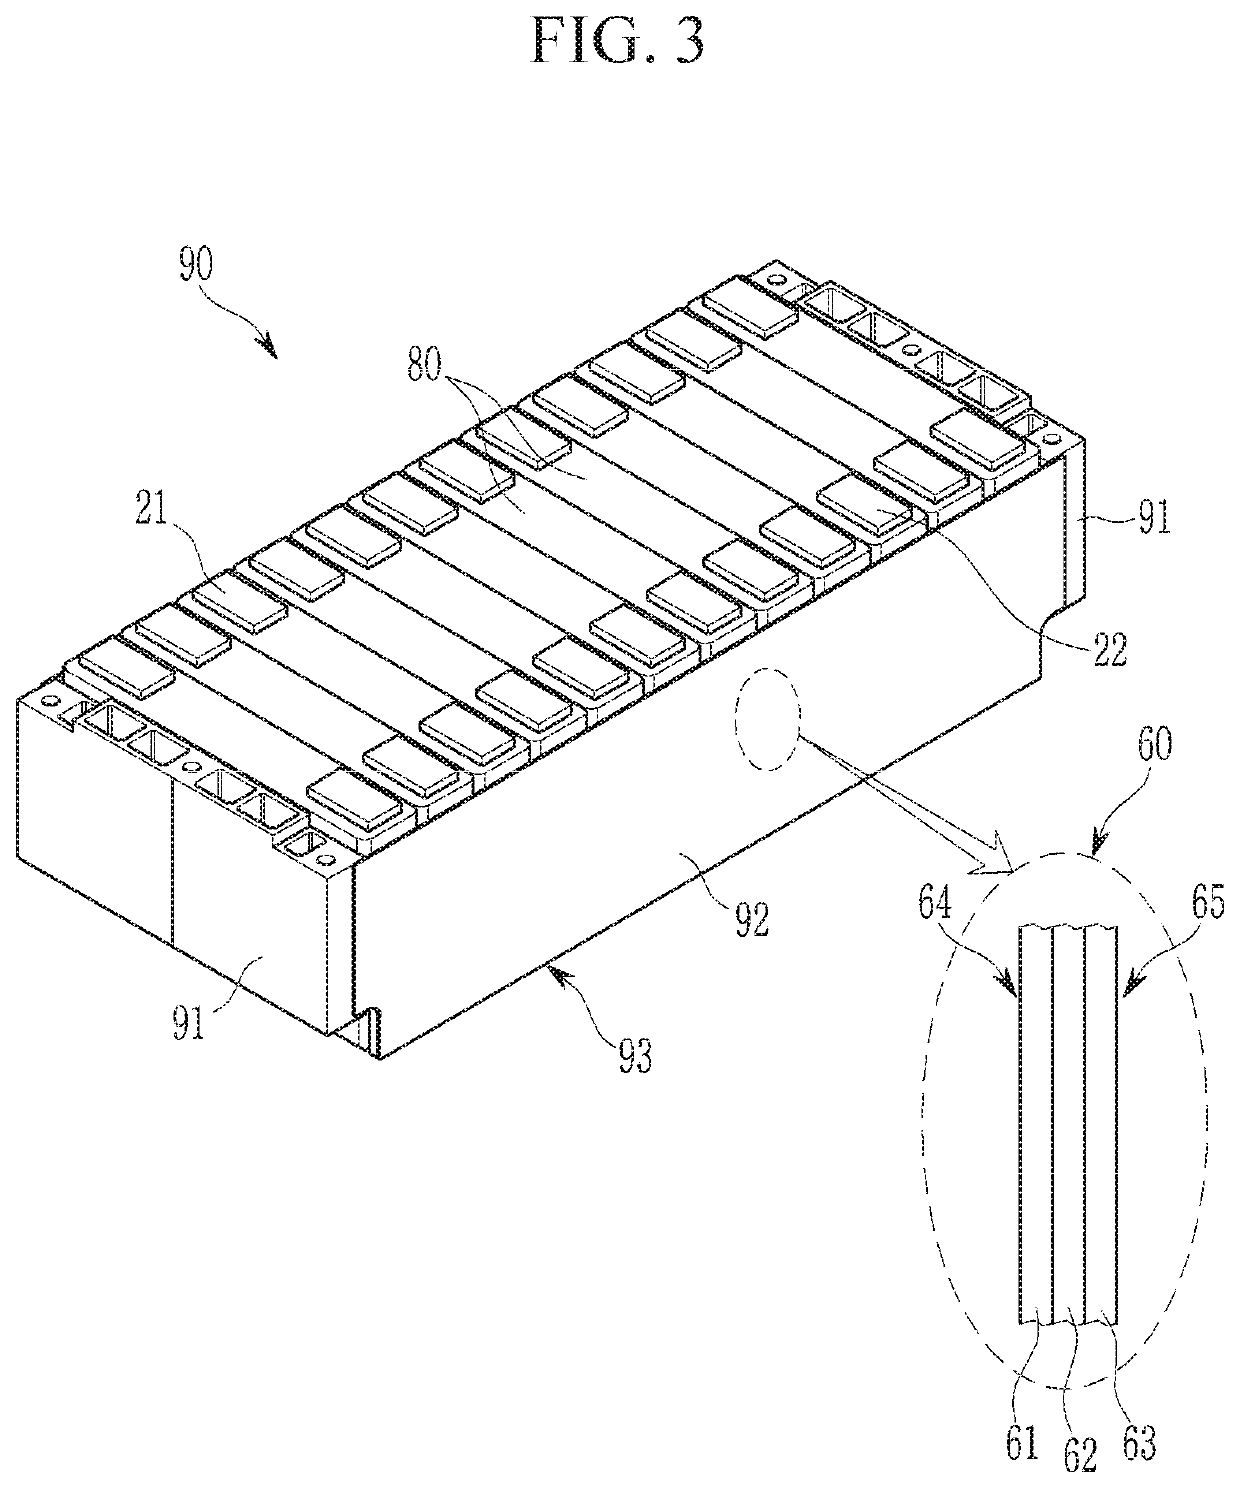 Wall structure of battery cell, battery sub-module, battery module, or a battery system